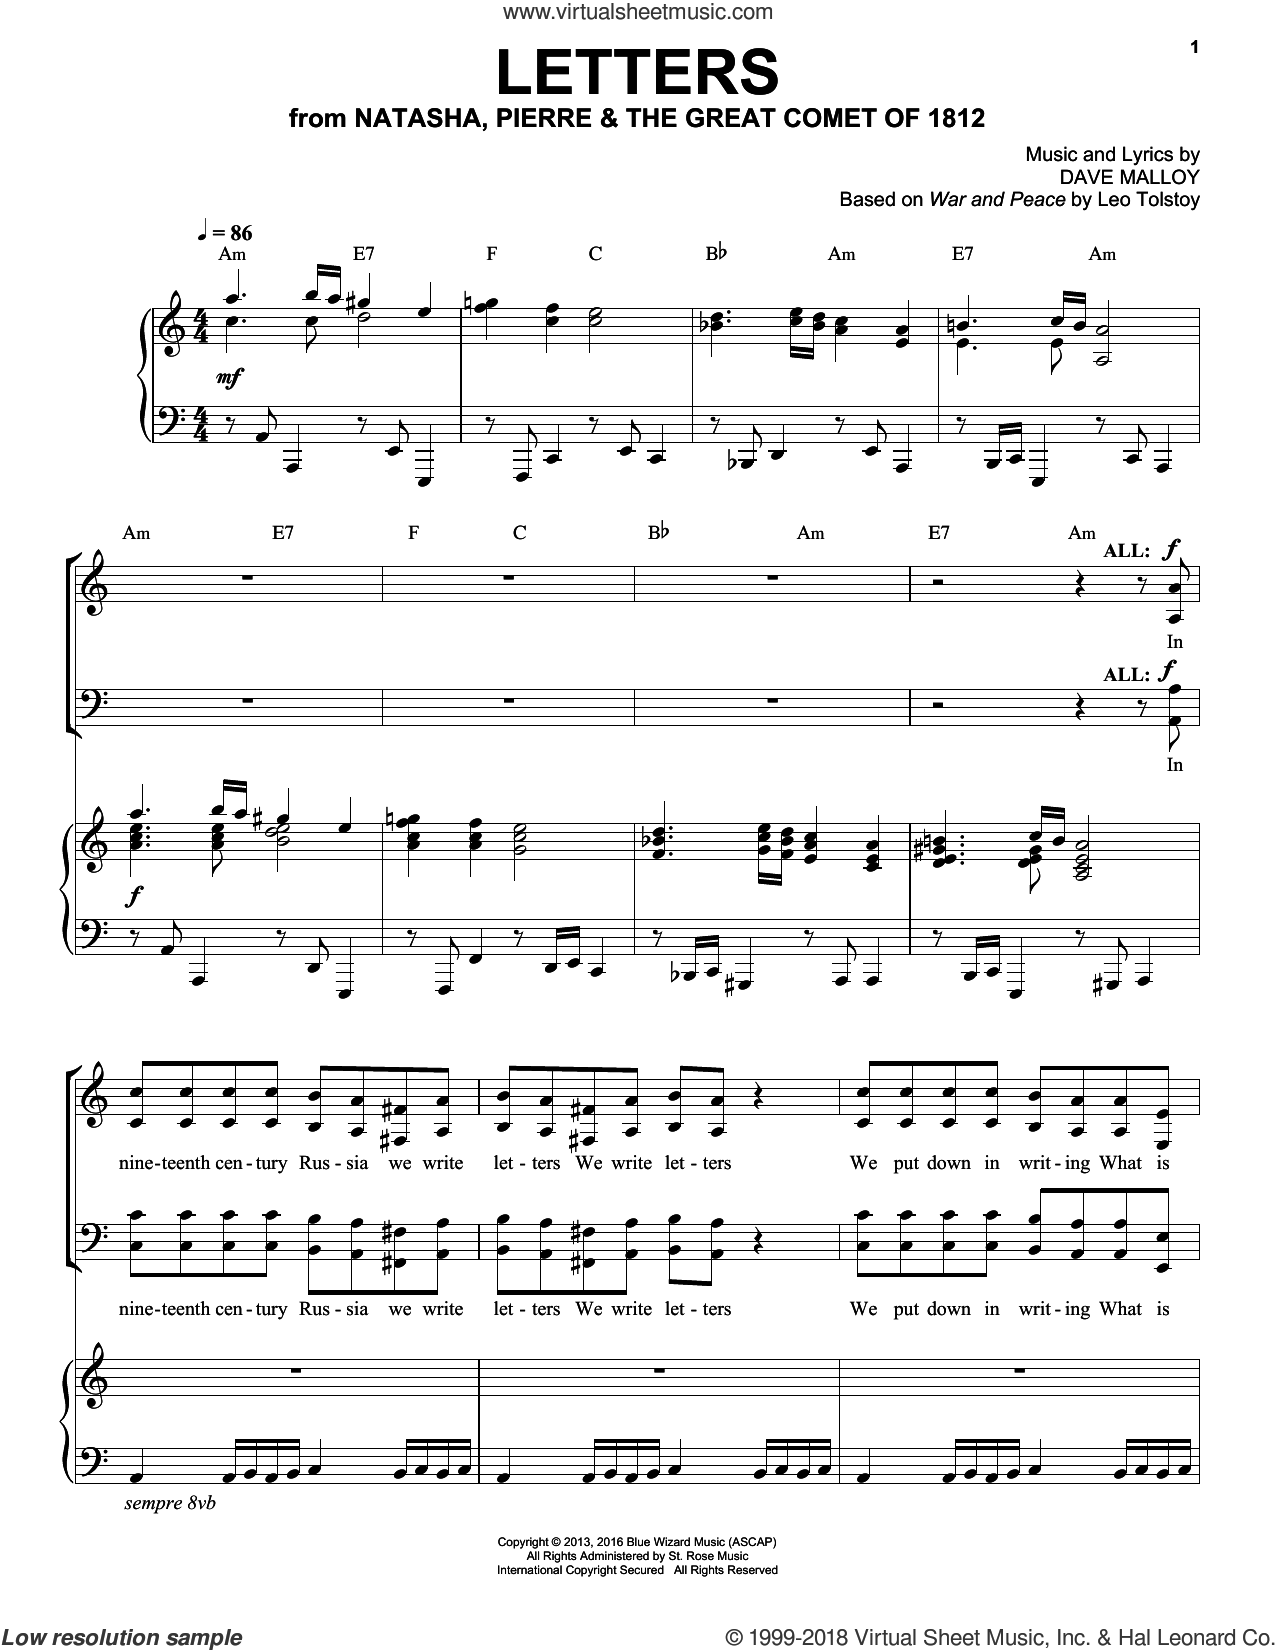 Groban - Letters sheet music for voice and piano (PDF)